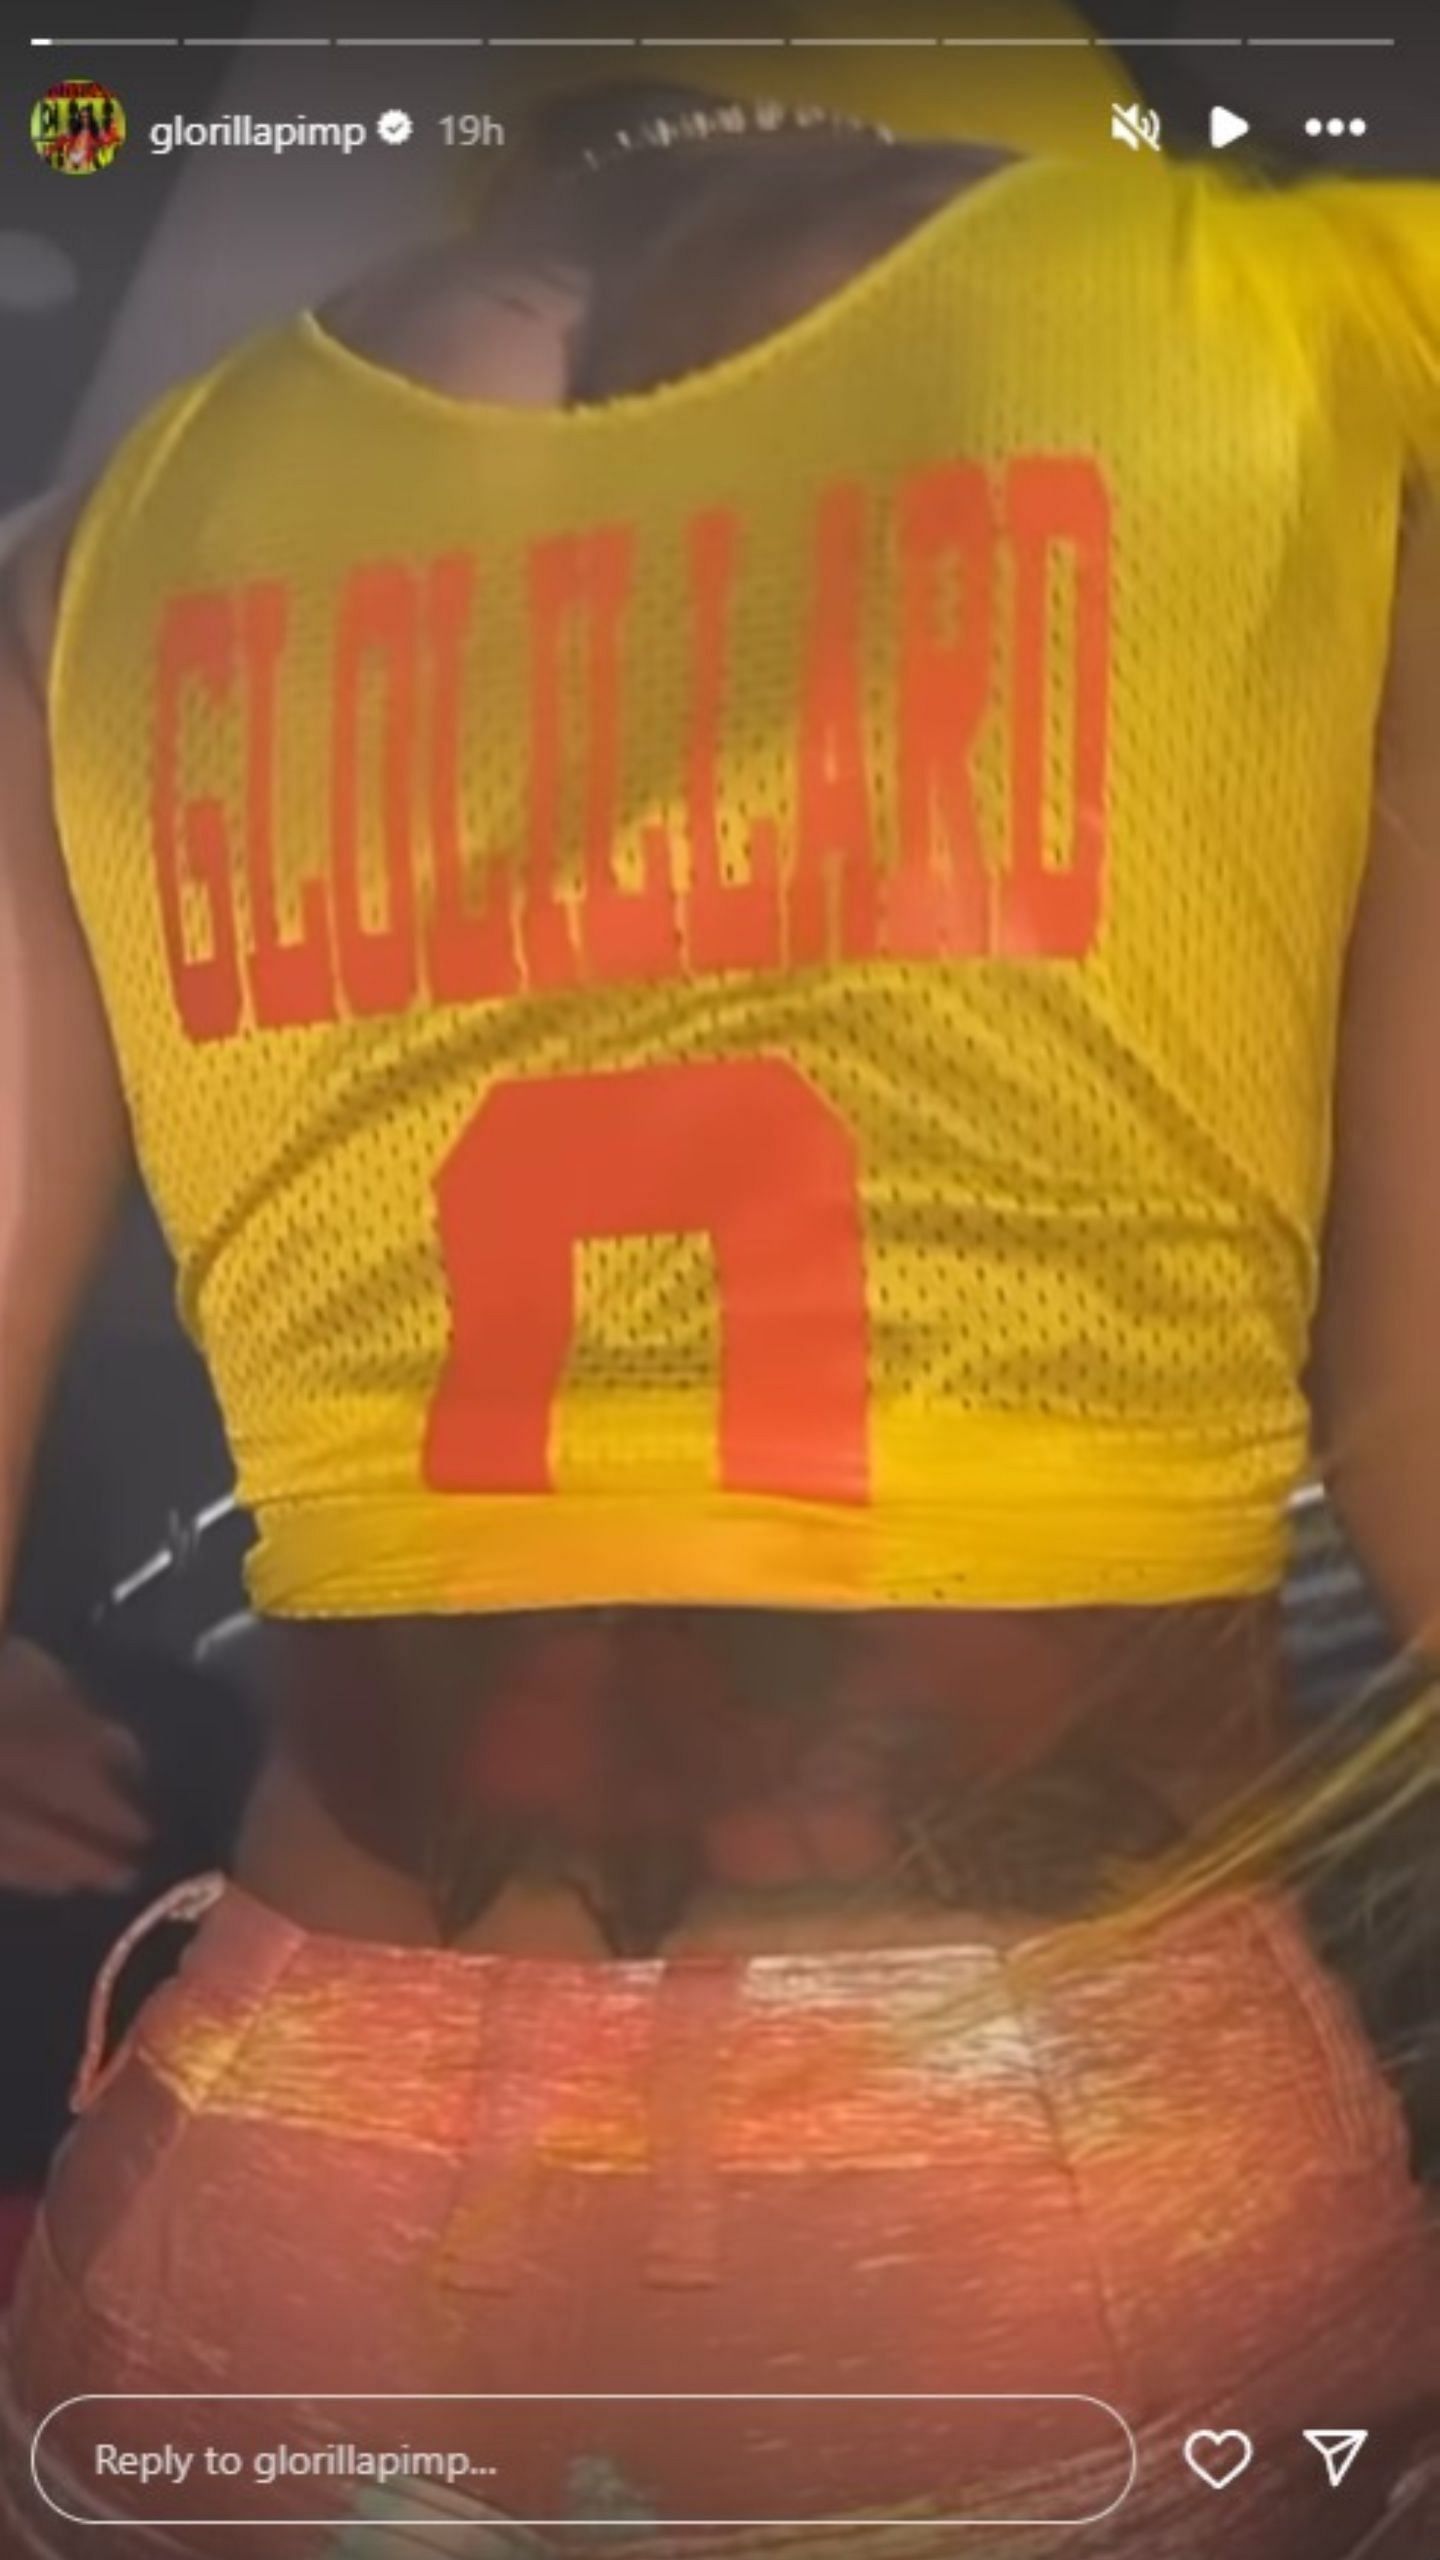 GloRilla posted a photo of her wearing a custom-made jersey